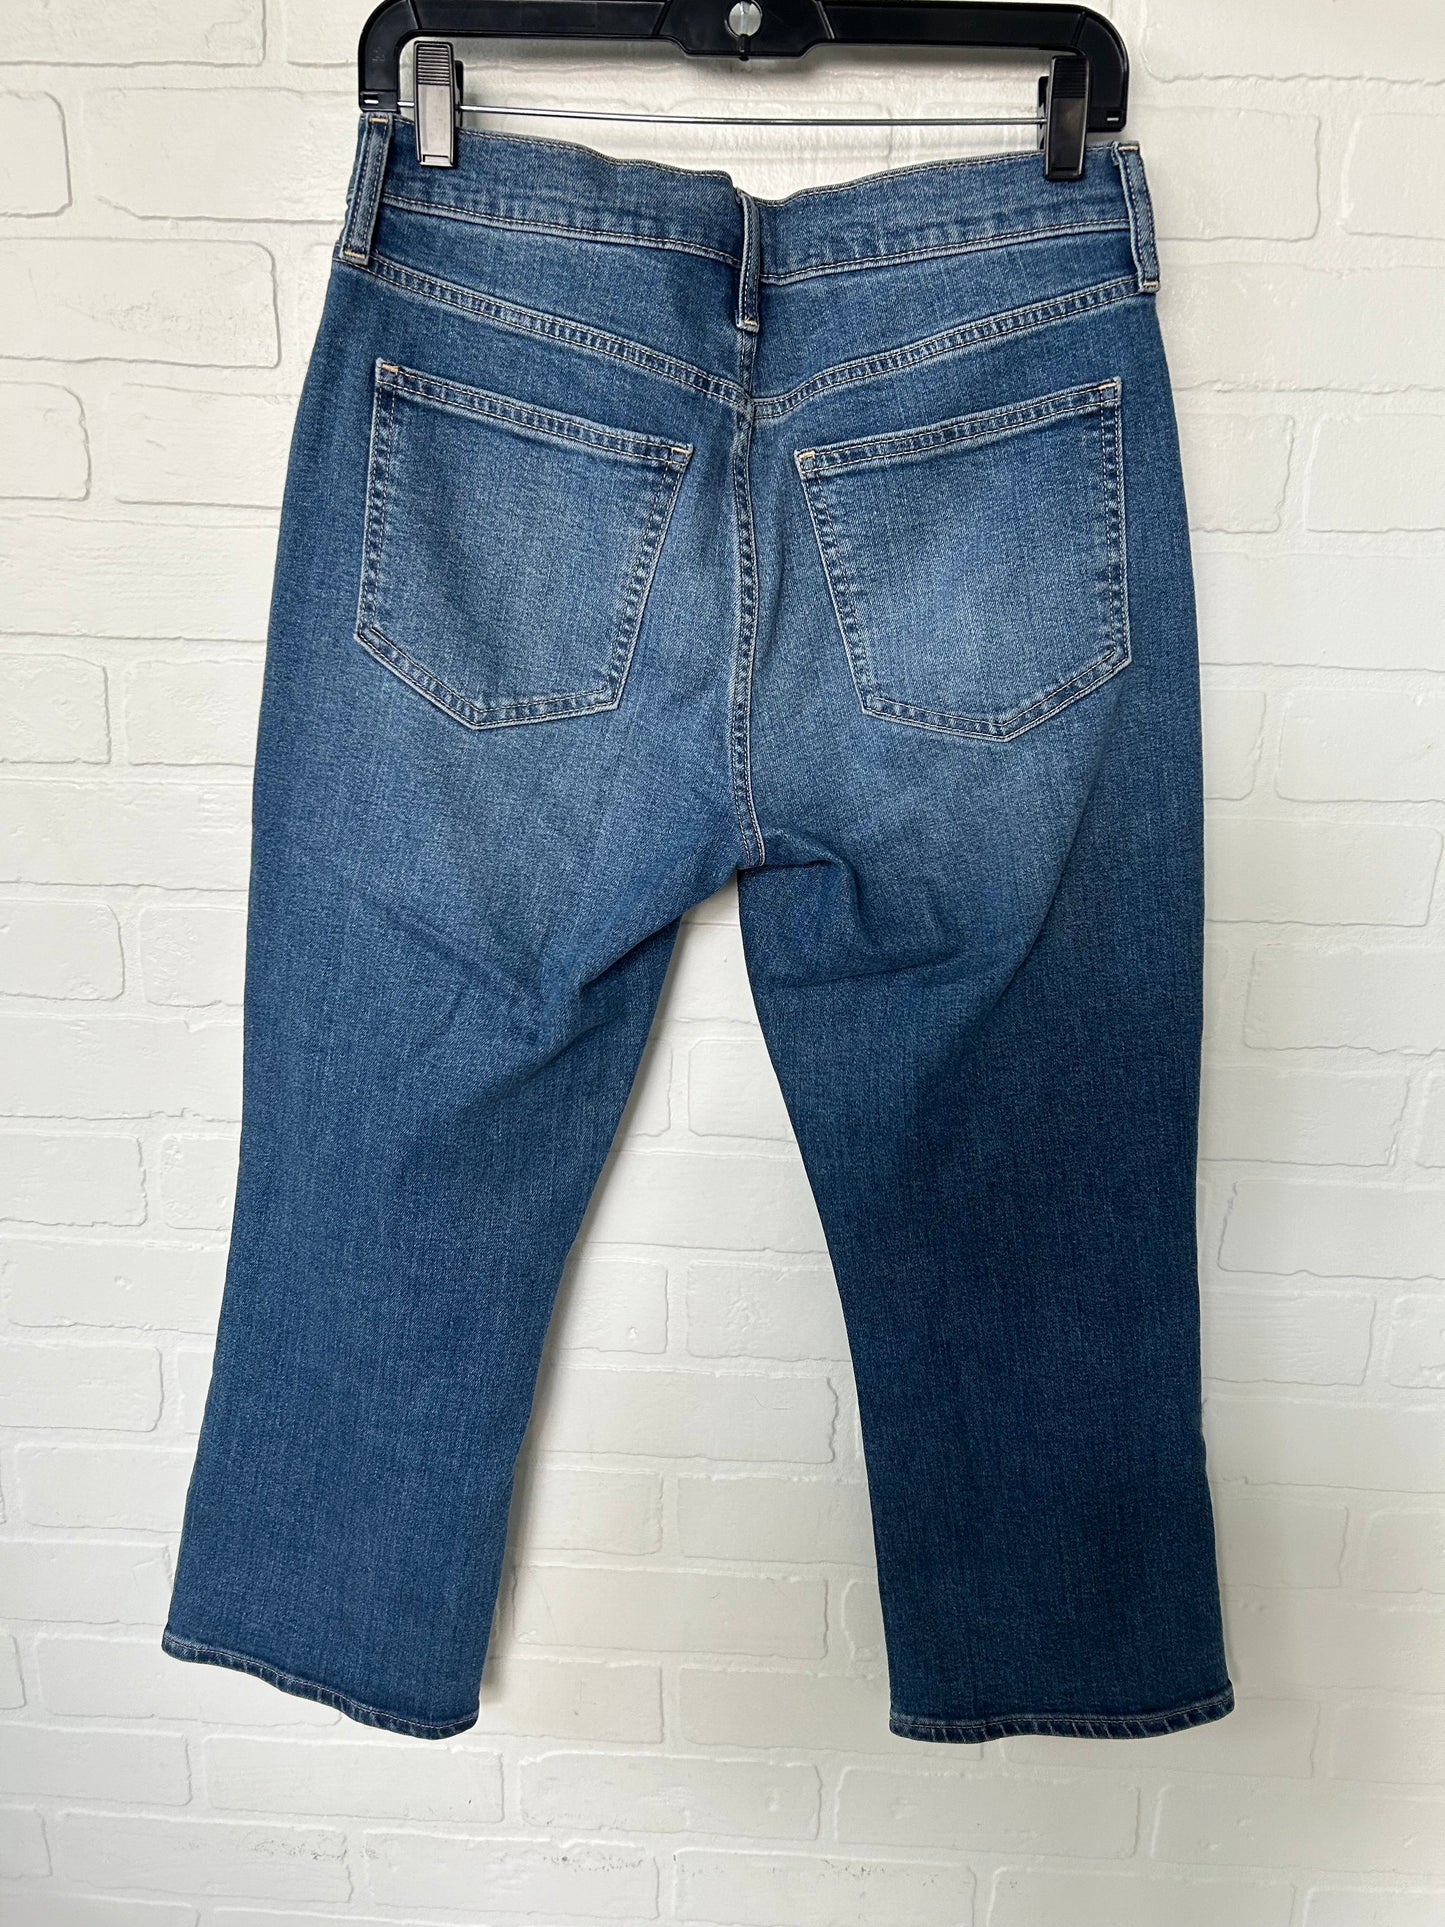 Jeans Cropped By Gap  Size: 8